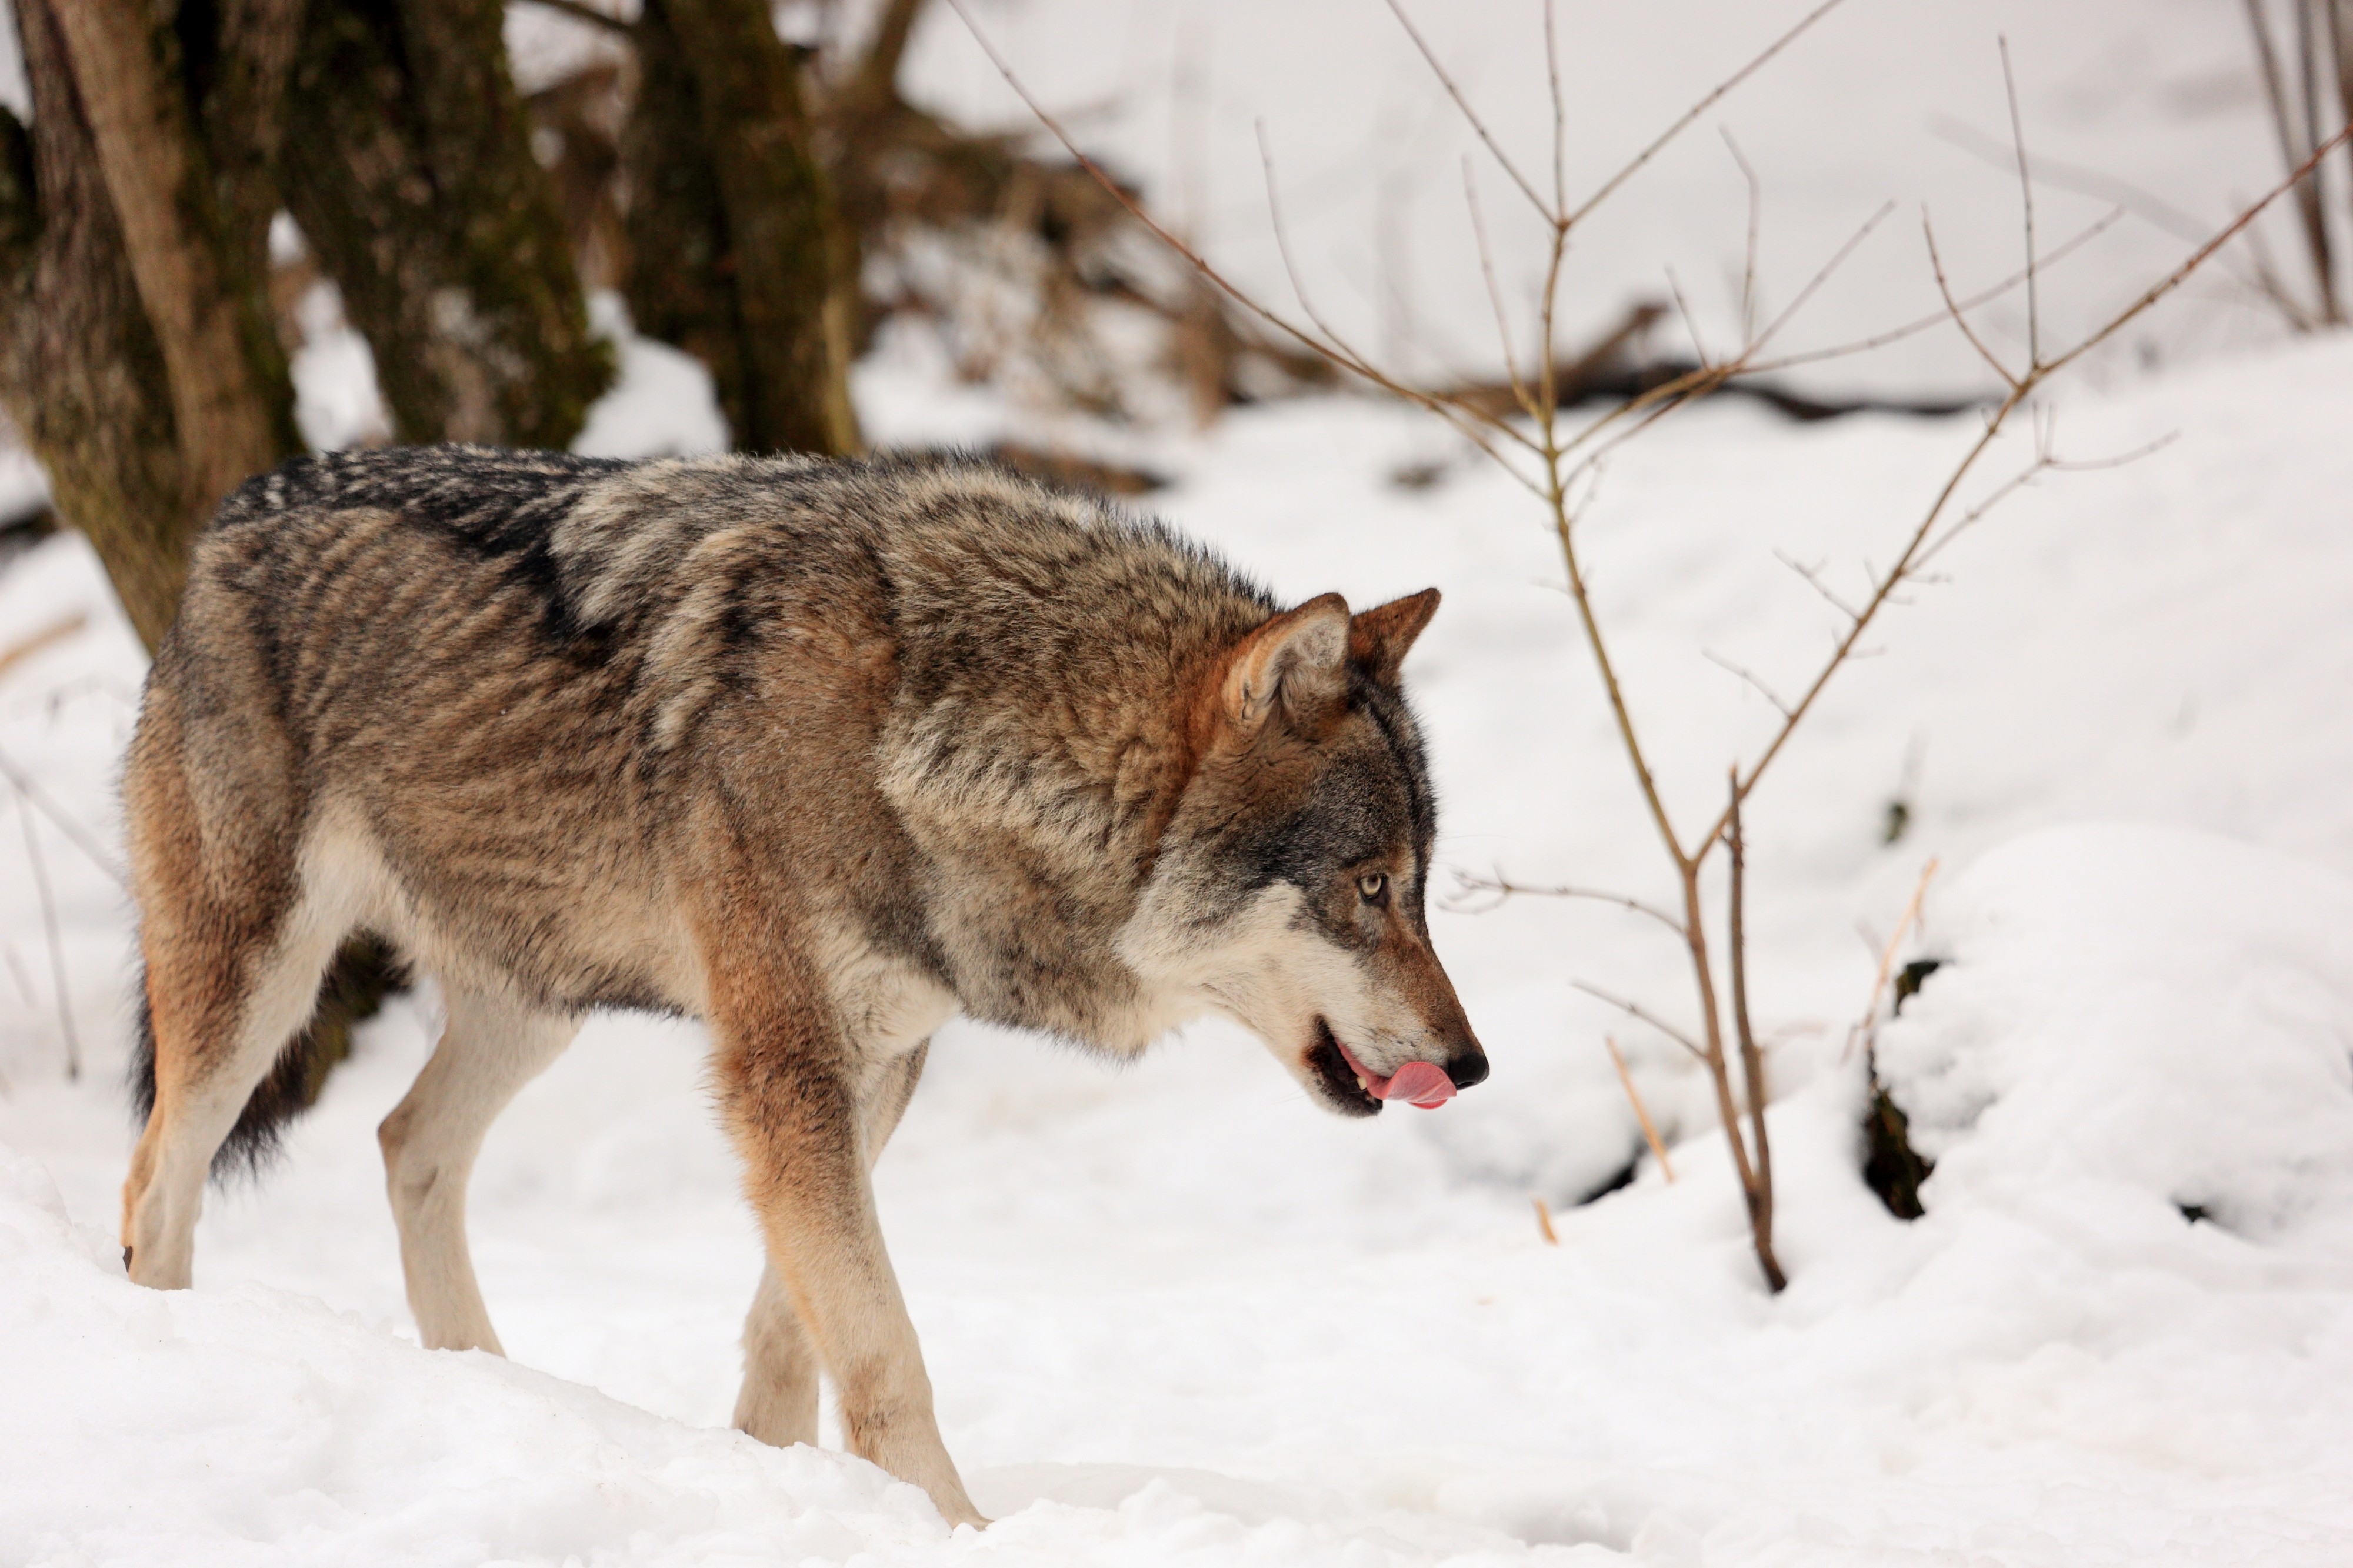 Wolf in snow at Munich zoo